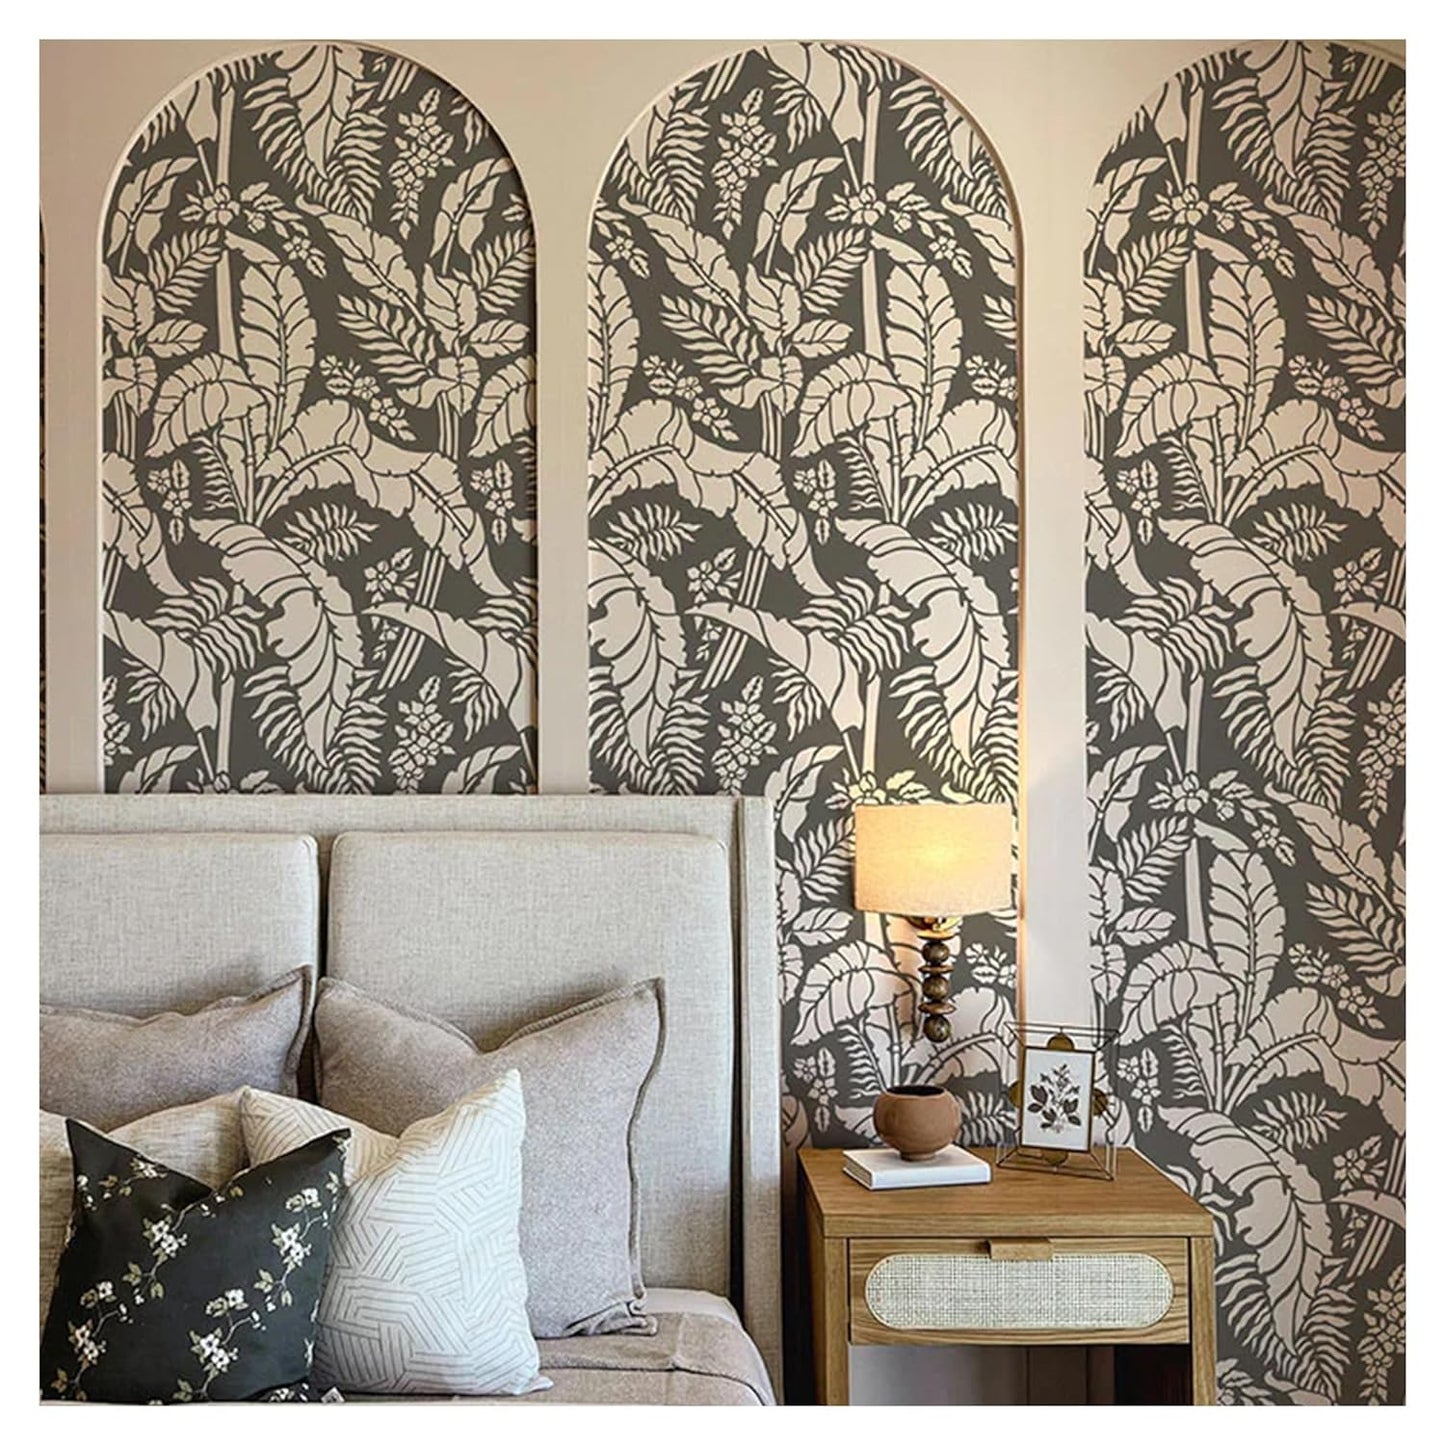 Latest Papua Palm Tree Wall Stencils for Wall Painting - Pack of 1, Sheet Size 24 x 36 inch/Design for Wall Painting 22 x 34 inch - Large